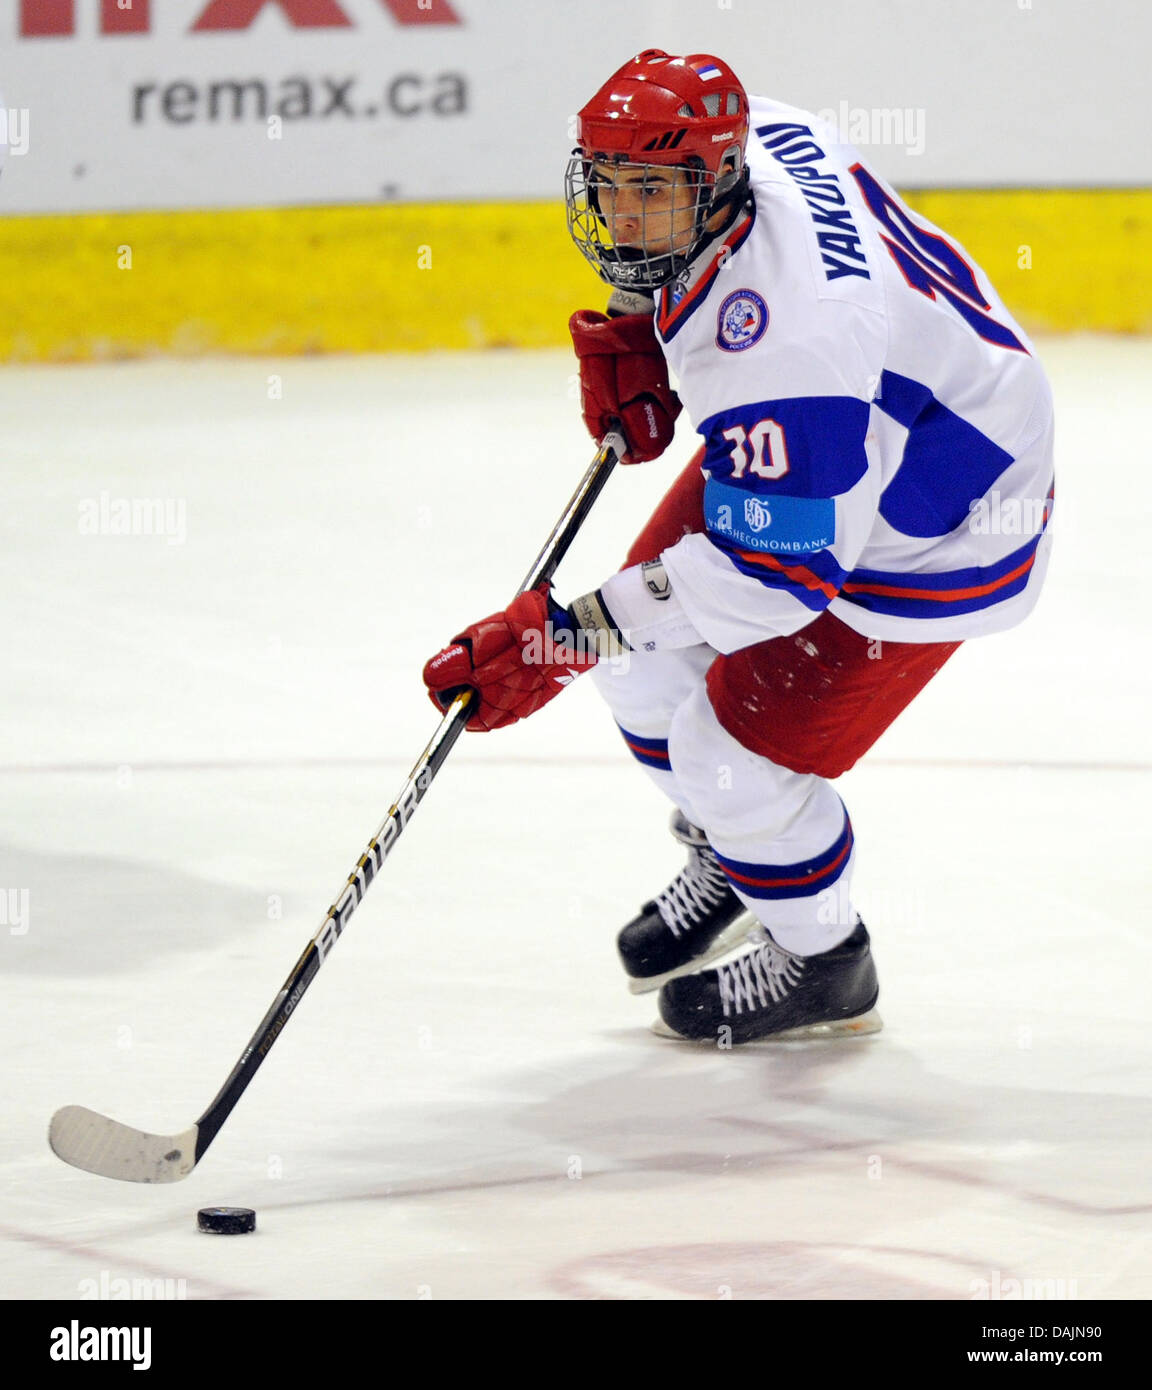 Russia's Nail Yakupov is pictured during the U18 World Ice Hockey Championships against Germany at the stadium Sahnpark in Crimmitschau, Germany, 16 April 2011. Photo: Thomas Eisenhuth Stock Photo